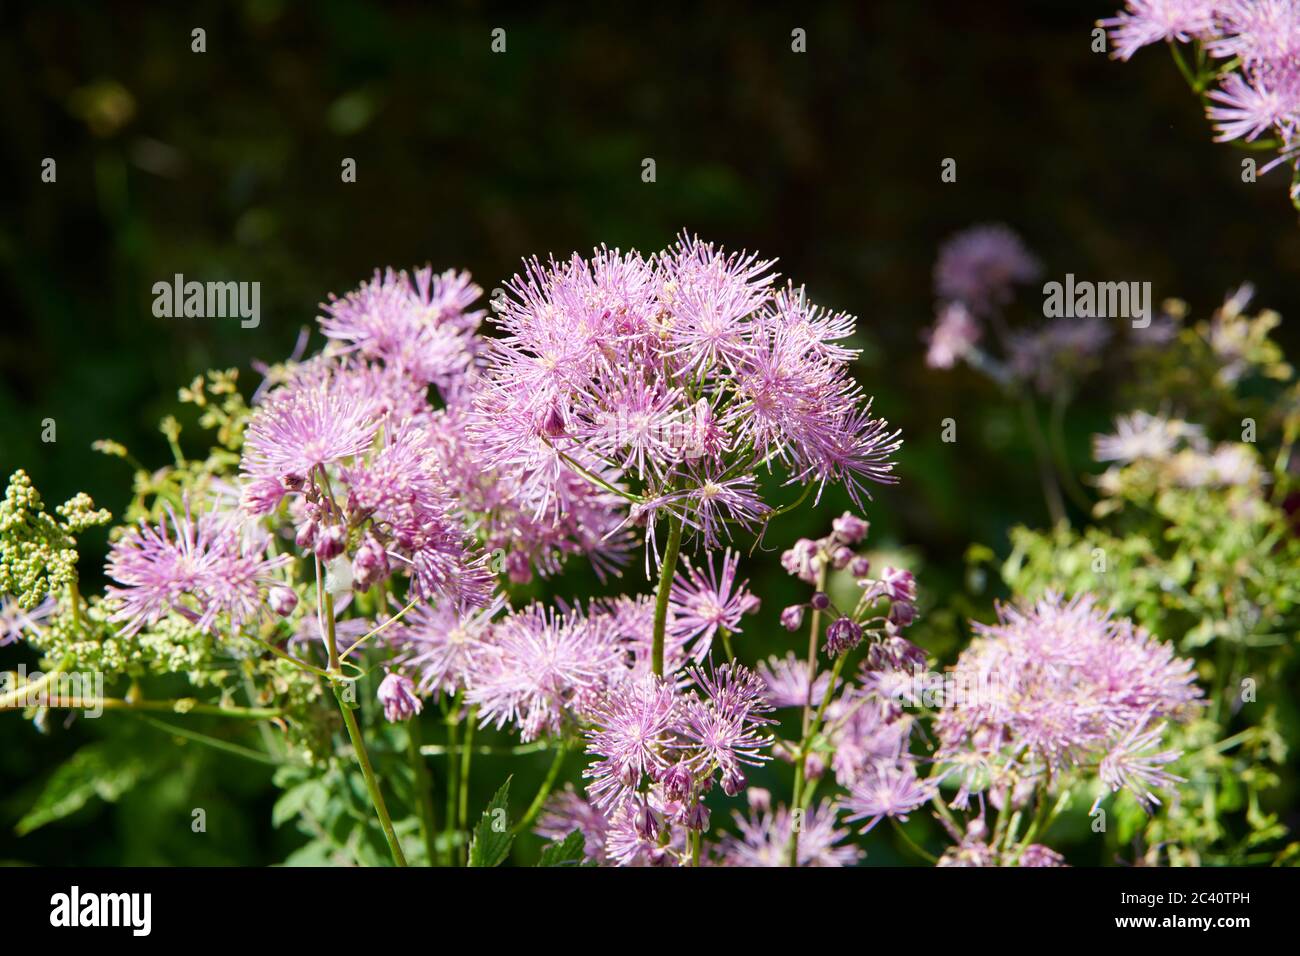 King of the meadow, Muskratweed, or Meadow-rue, Highly Toxic Plant. East Yorkshire, England, UK, GB. Stock Photo